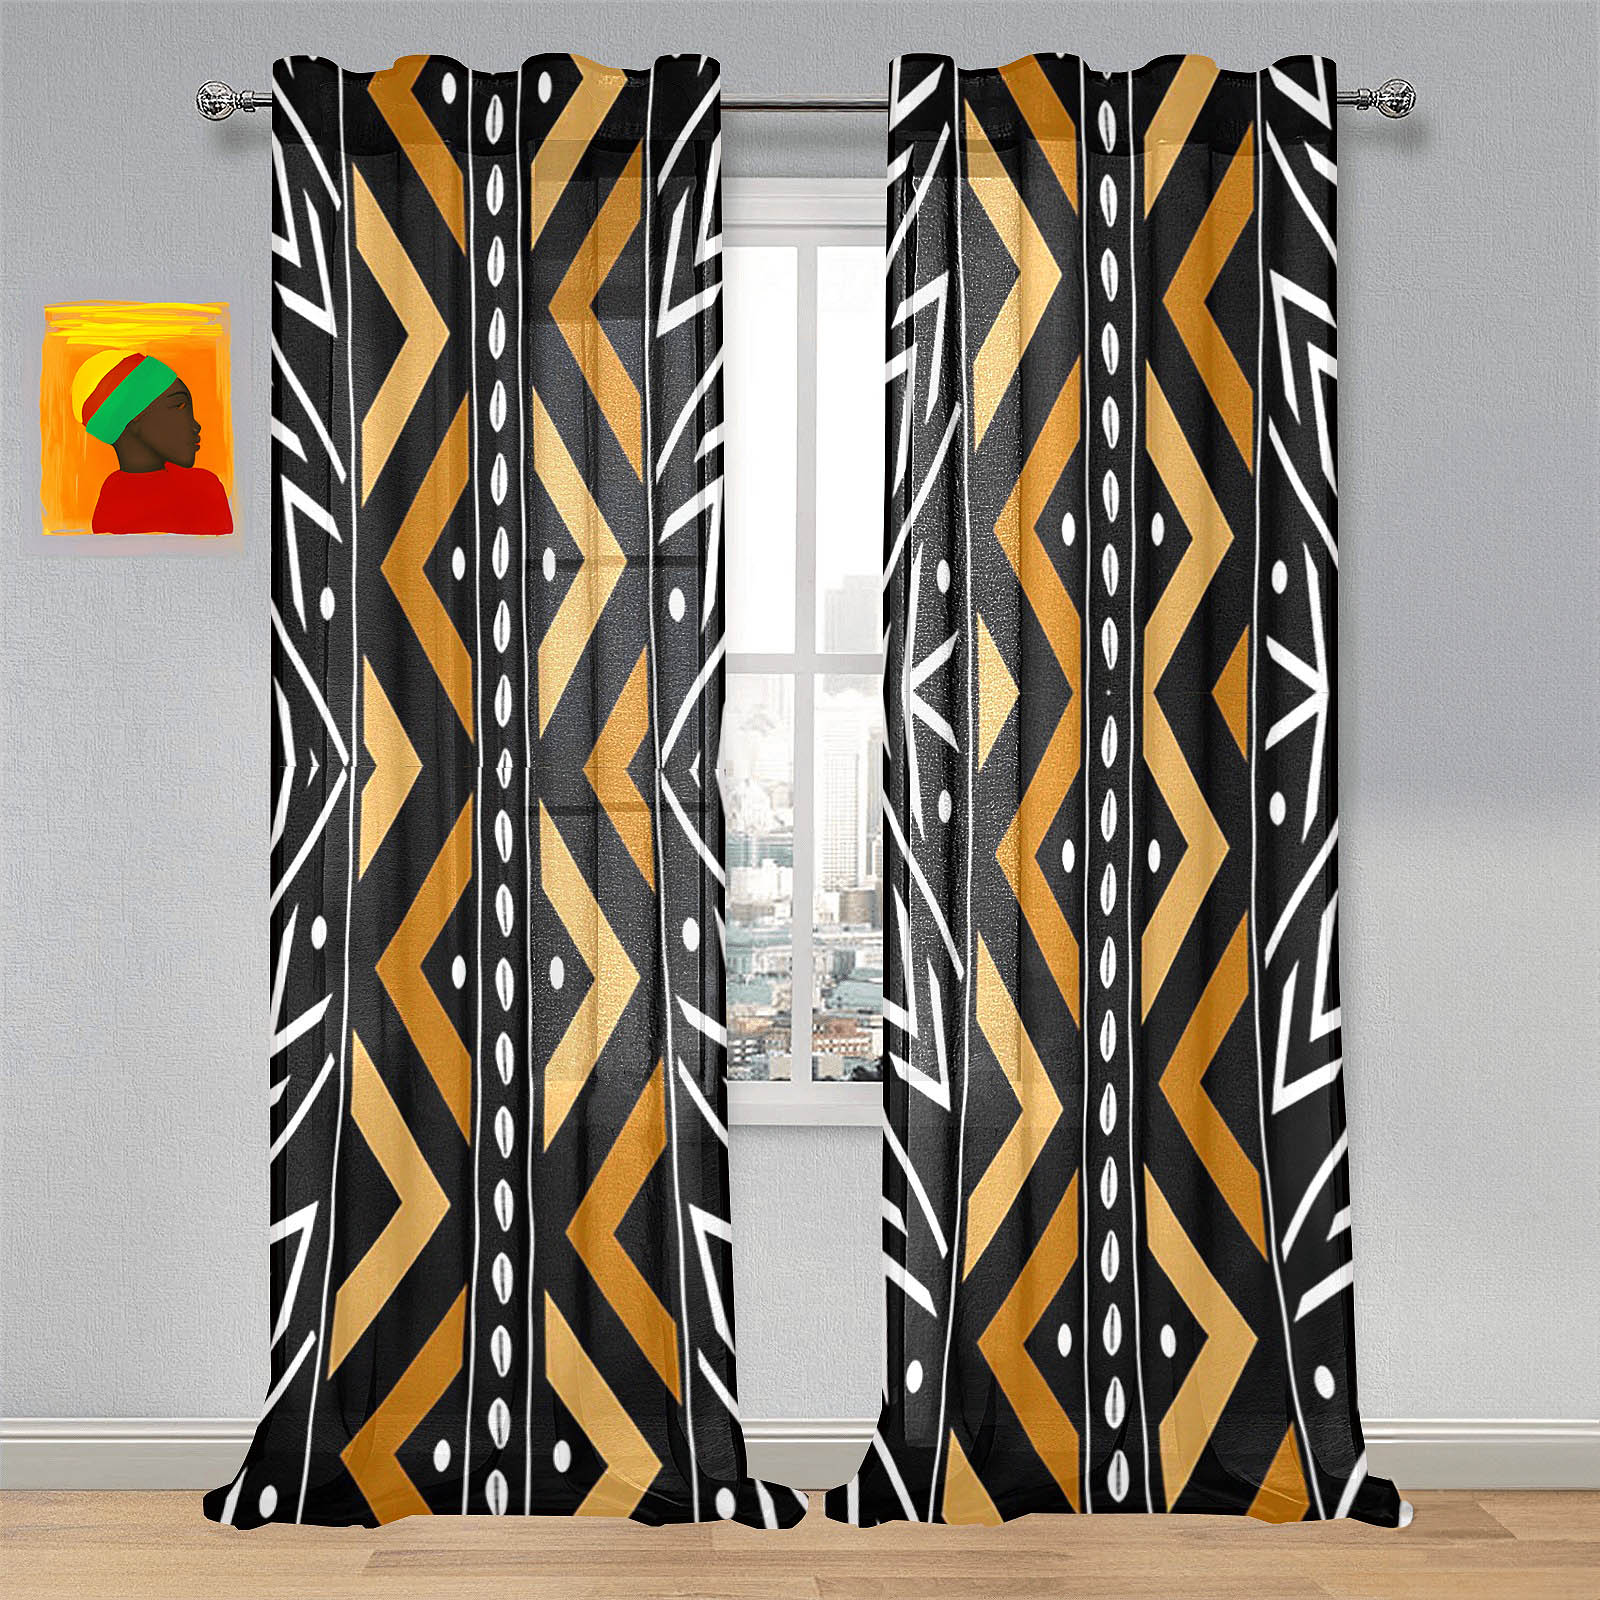 Zigzag African Curtain Tribal Print (Two-Piece)- Bynelo